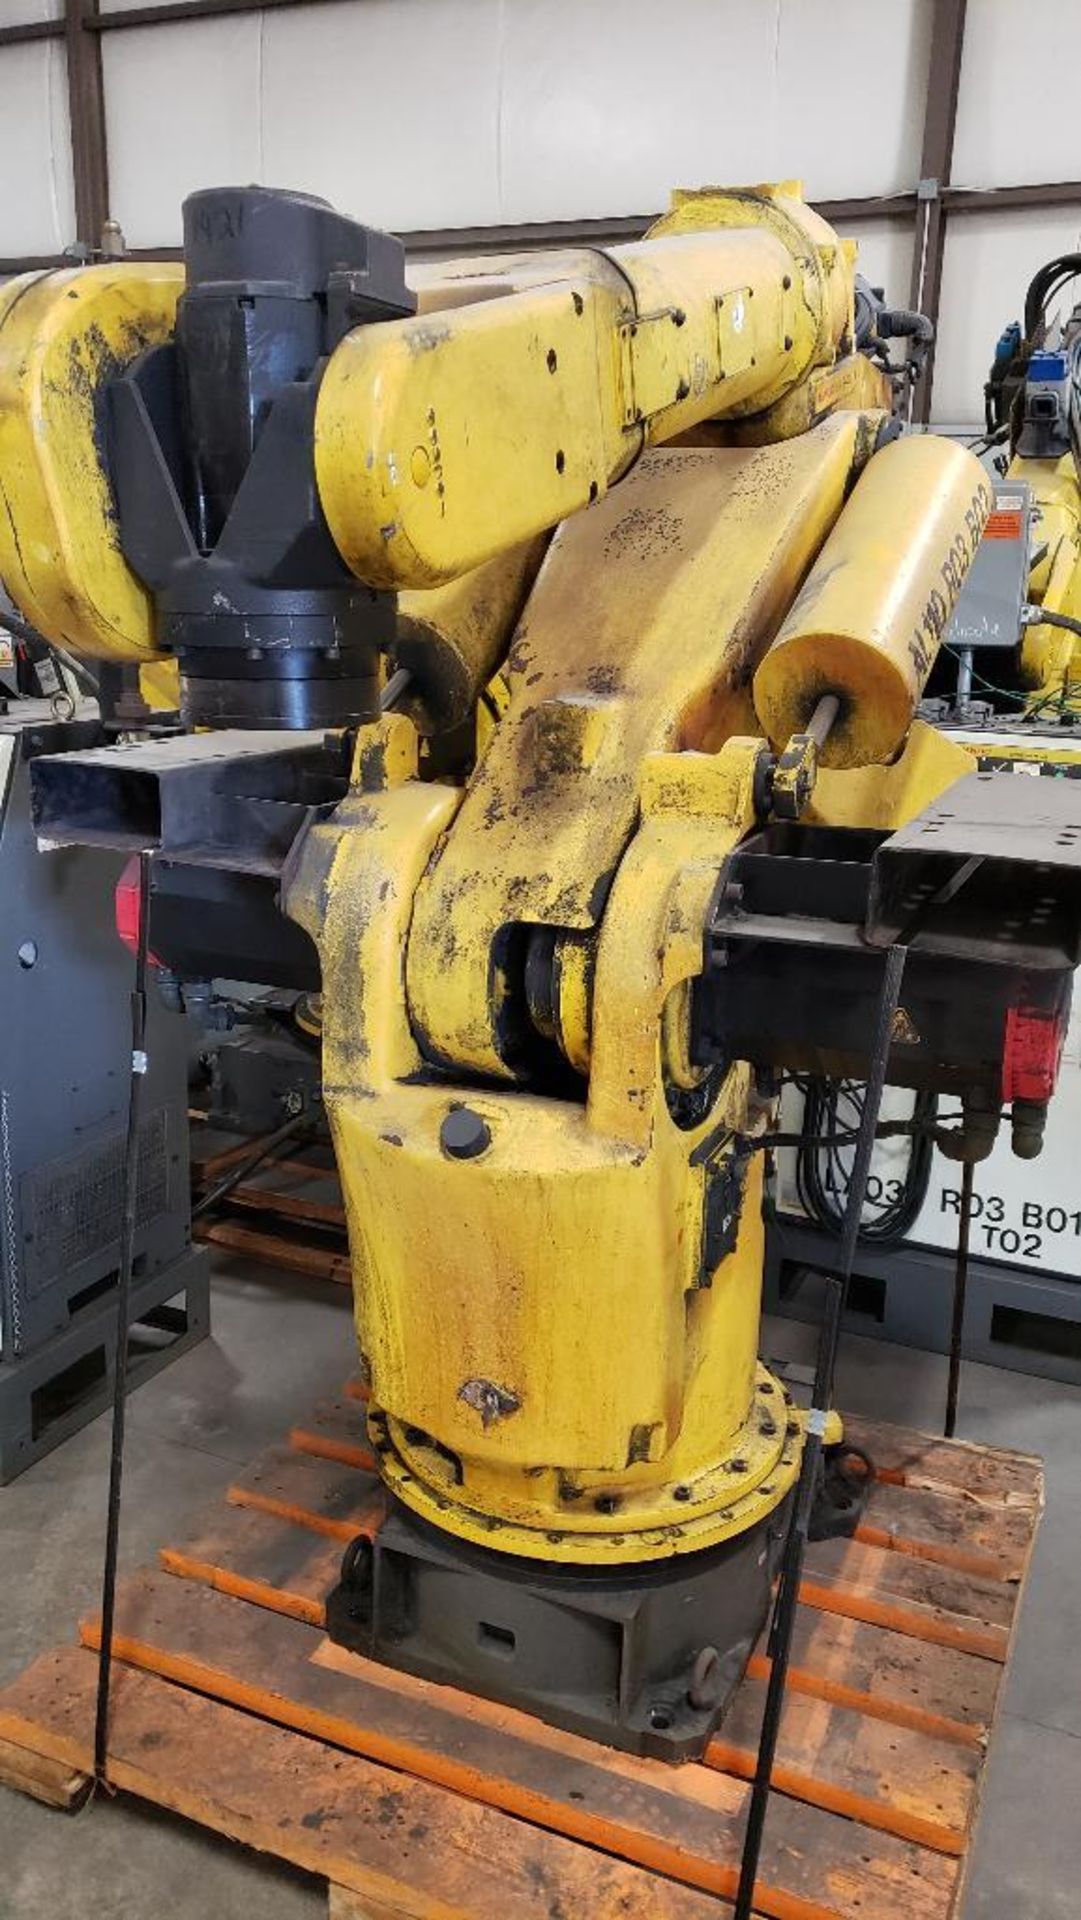 Fanuc S-420iW robot with R-J2 controller. - Image 13 of 15